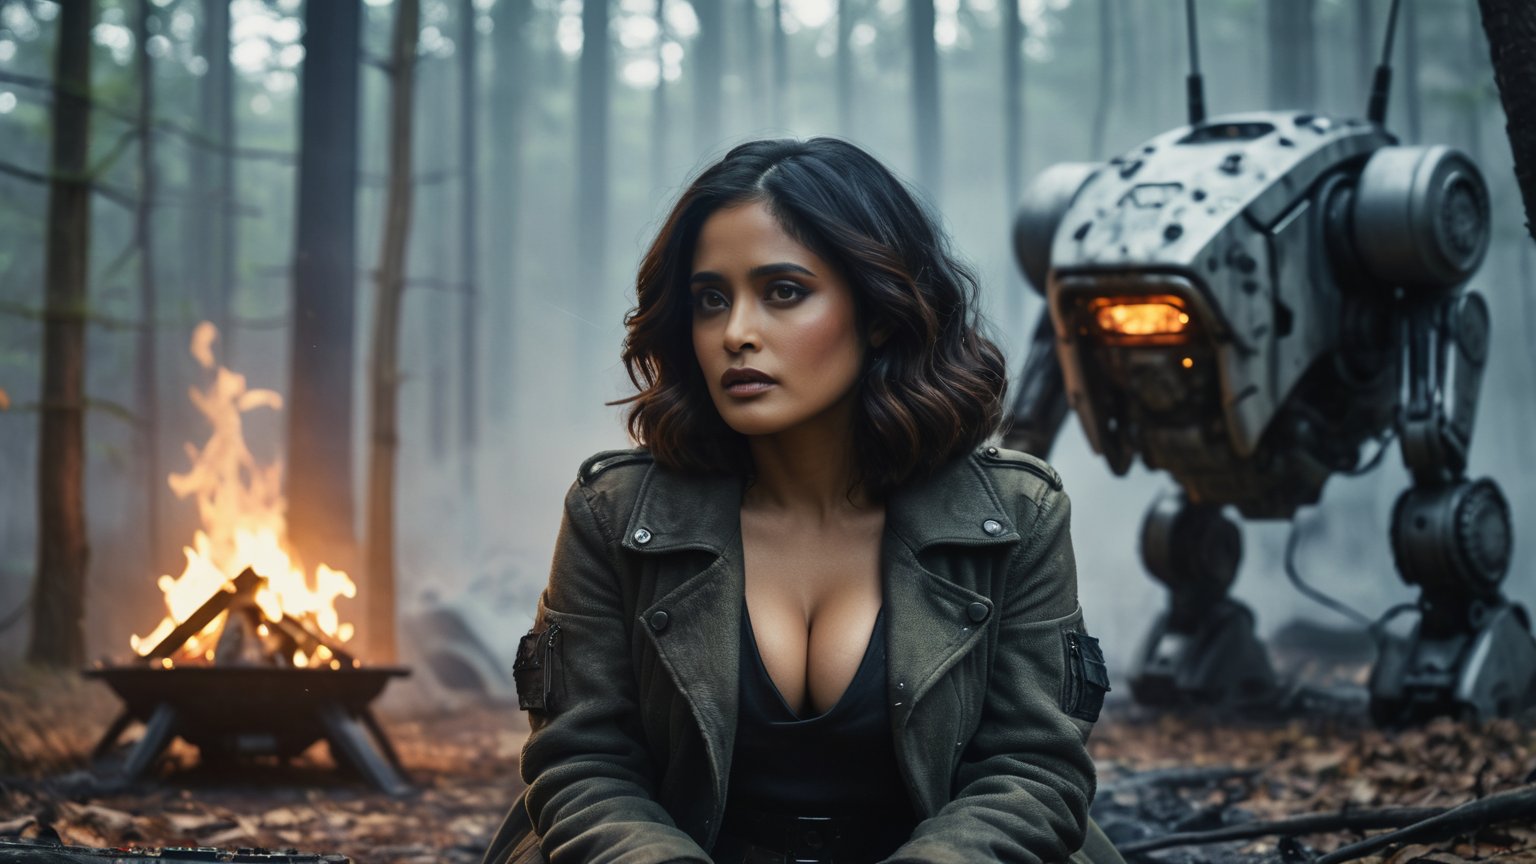 (((sexy cyberpunk android Salma Hayek sits with combat robots by a fire near a futuristic plasma shelter-box))), ((vintage dystopian cyberpunk winter forest background)), ((lighting dust particles)), horror movie scene, best quality, masterpiece, (photorealistic:1.4), 8k uhd, dslr, masterpiece photoshoot, (in the style of Hans Heysen and Carne Griffiths),shot on Canon EOS 5D Mark IV DSLR, 85mm lens, long exposure time, f/8, ISO 100, shutter speed 1/125, award winning photograph, facing camera, perfect contrast,cinematic style